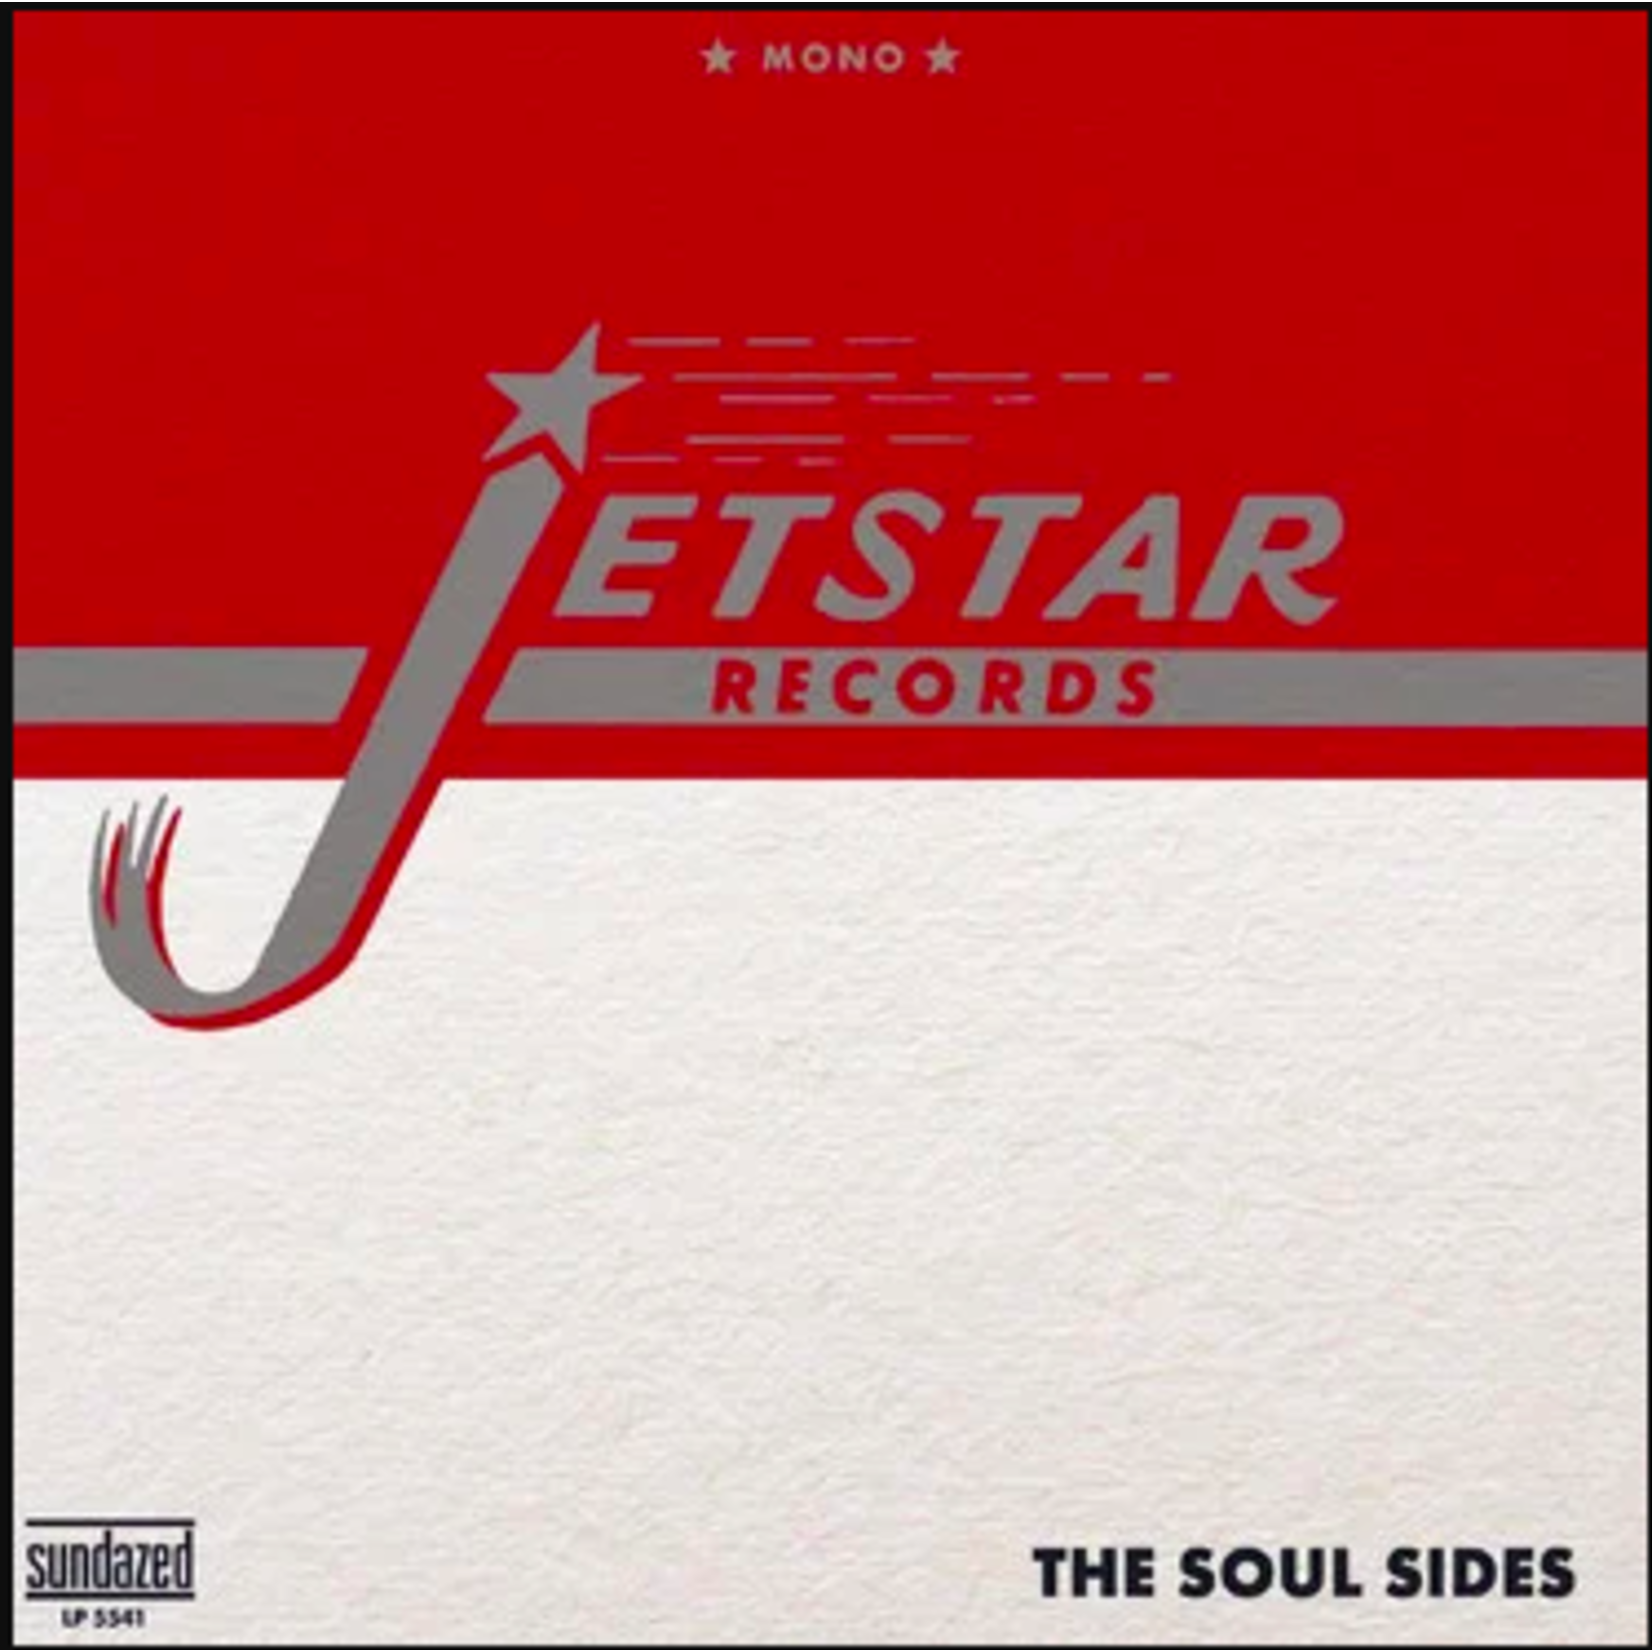 [New] Jetstar Records - The Soul Sides (clear vinyl)